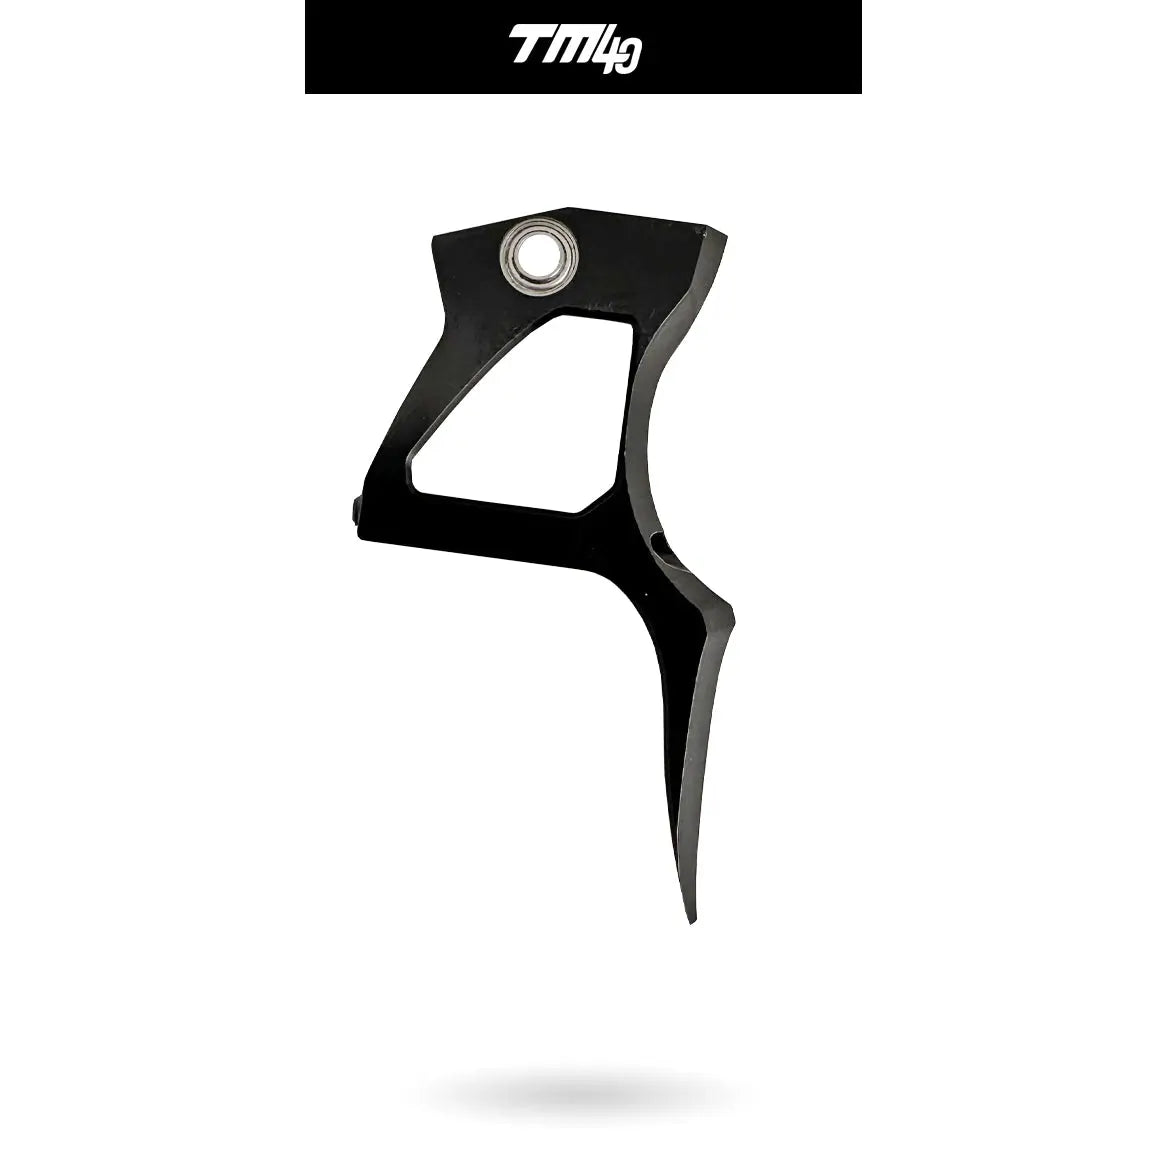 LUXE DEUCE "NIGHTHAWK" TRIGGER - TM40 Infamous Paintball